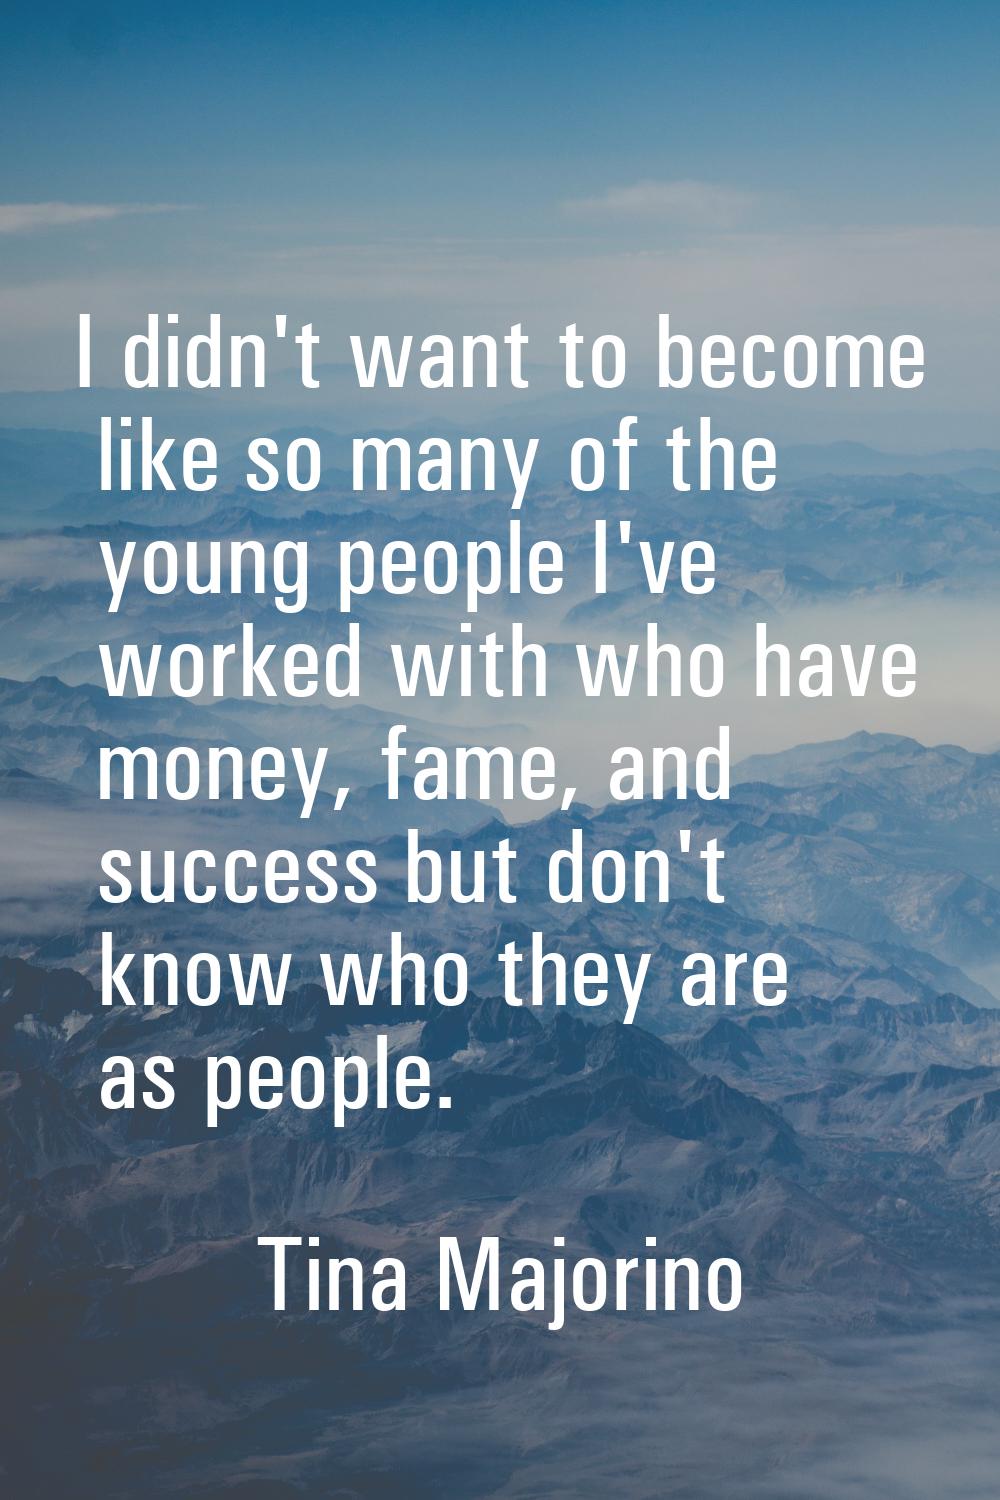 I didn't want to become like so many of the young people I've worked with who have money, fame, and